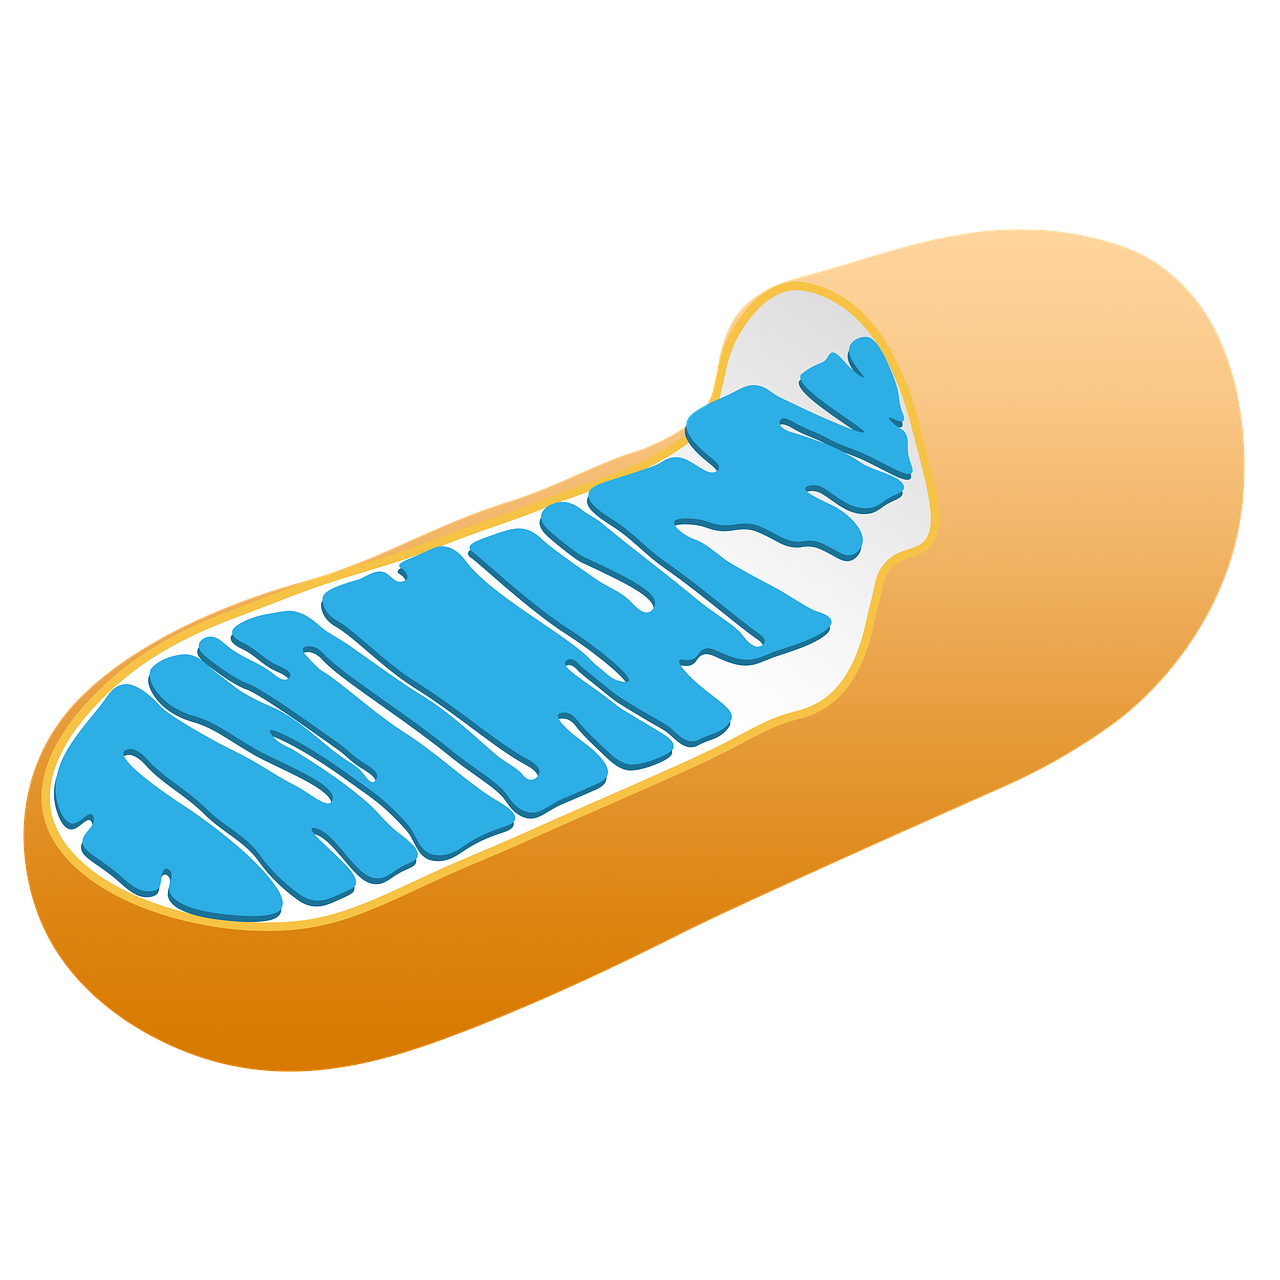 Mitochondria,cell,biology,science,structure free image from